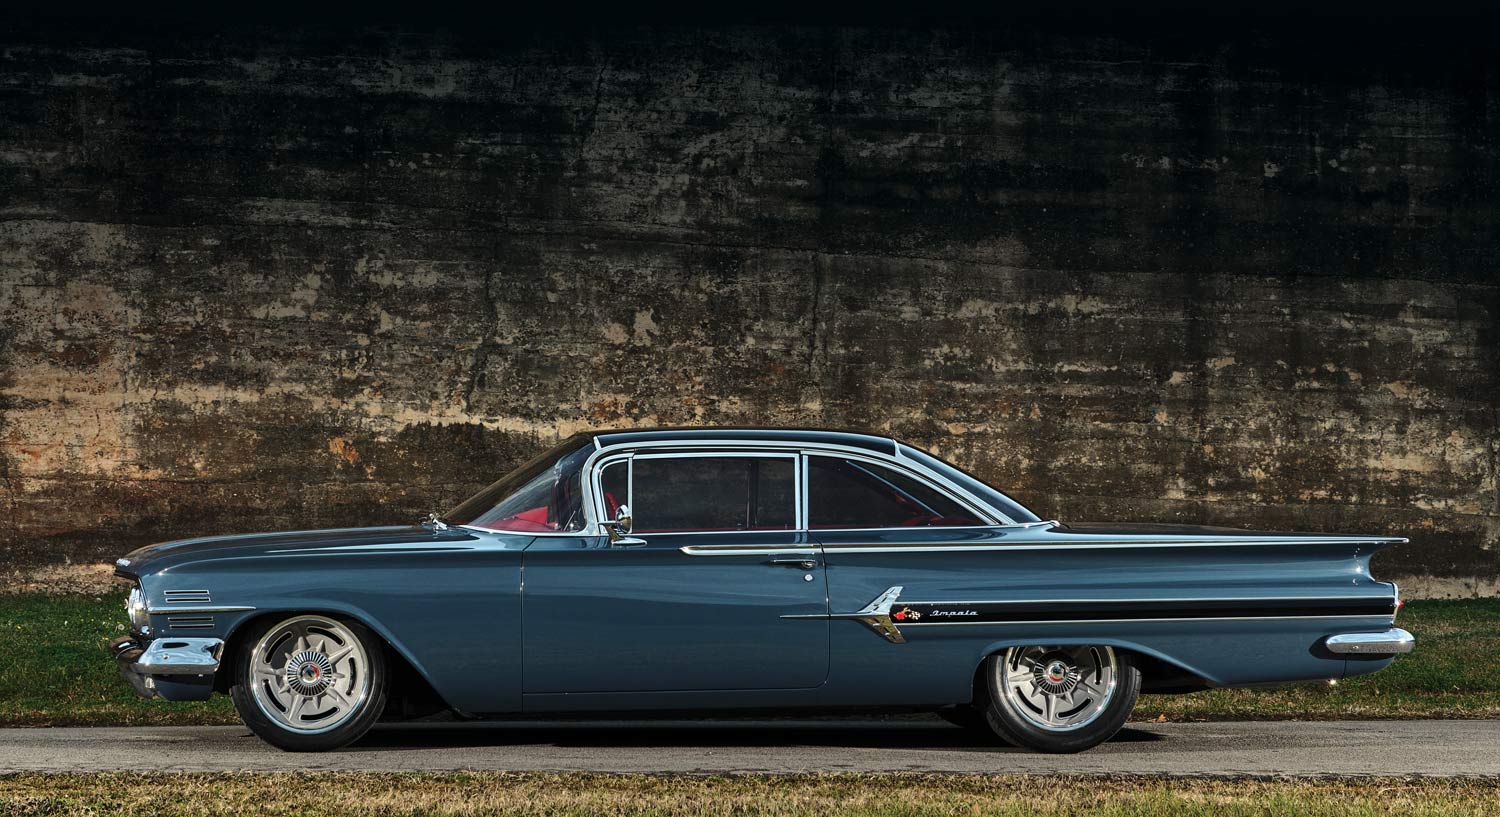 1960 Chevy Impala side view